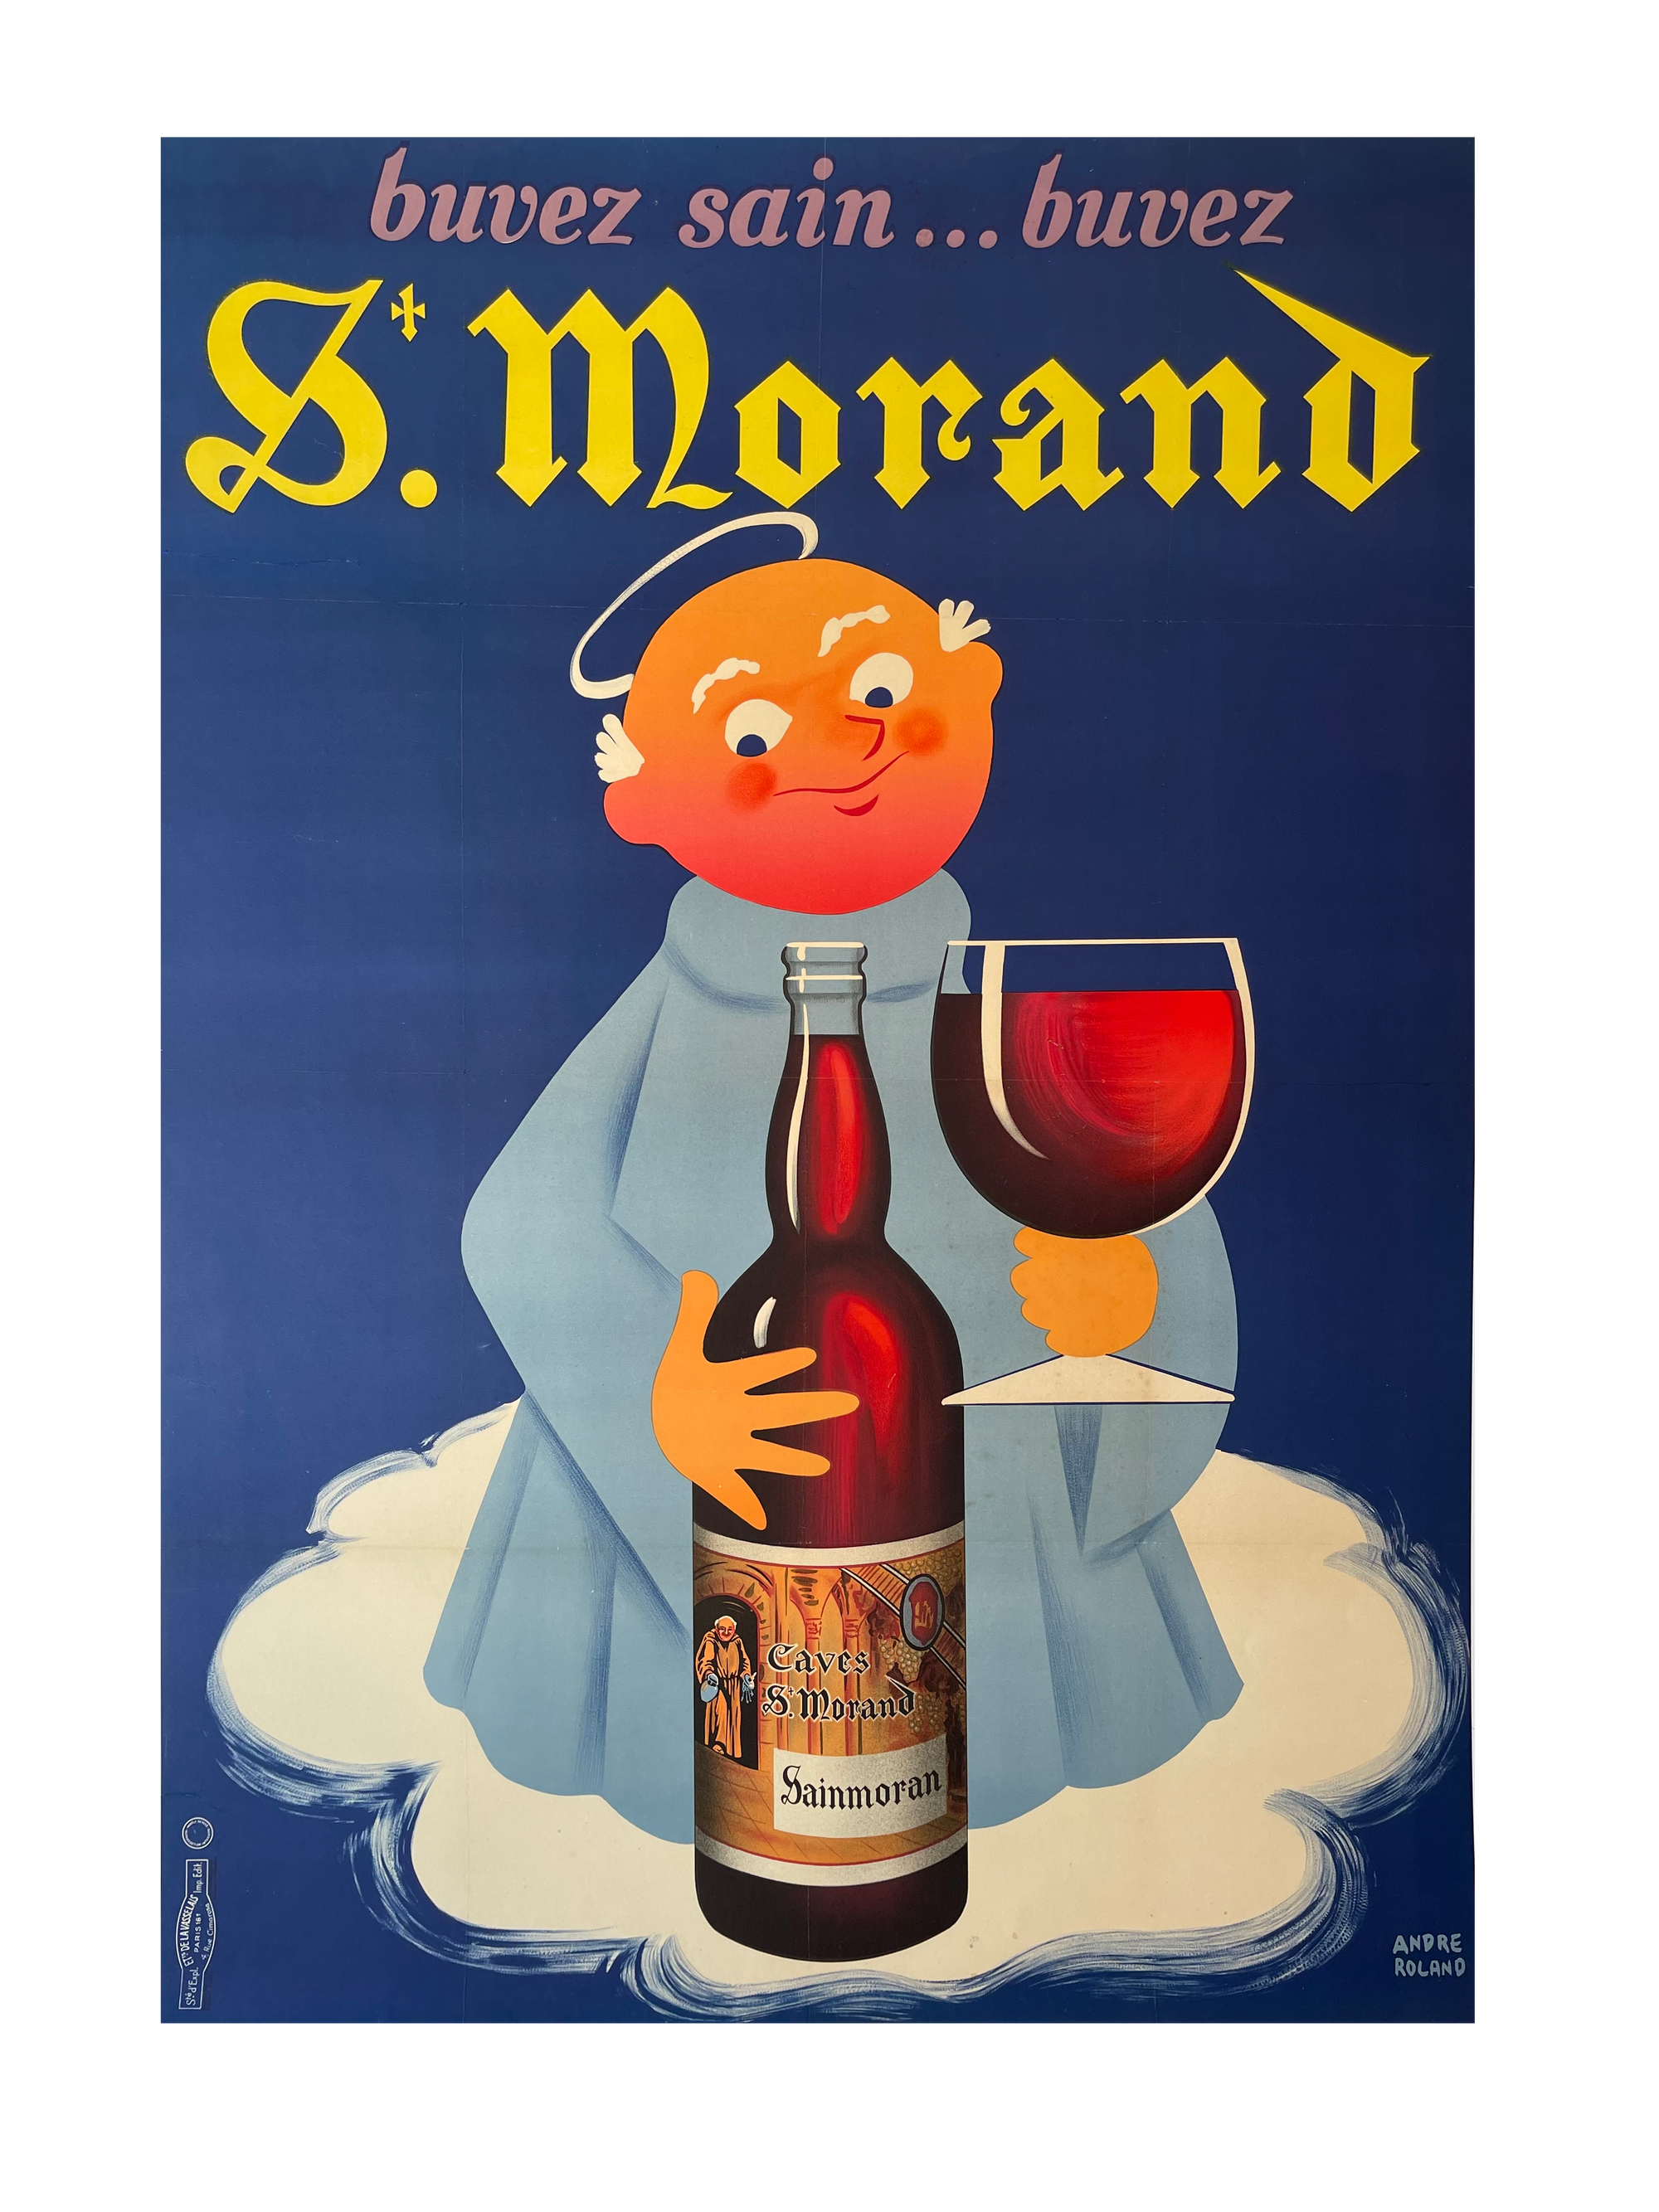 'St. Morand Vins' Wine Advert by Andre Roland